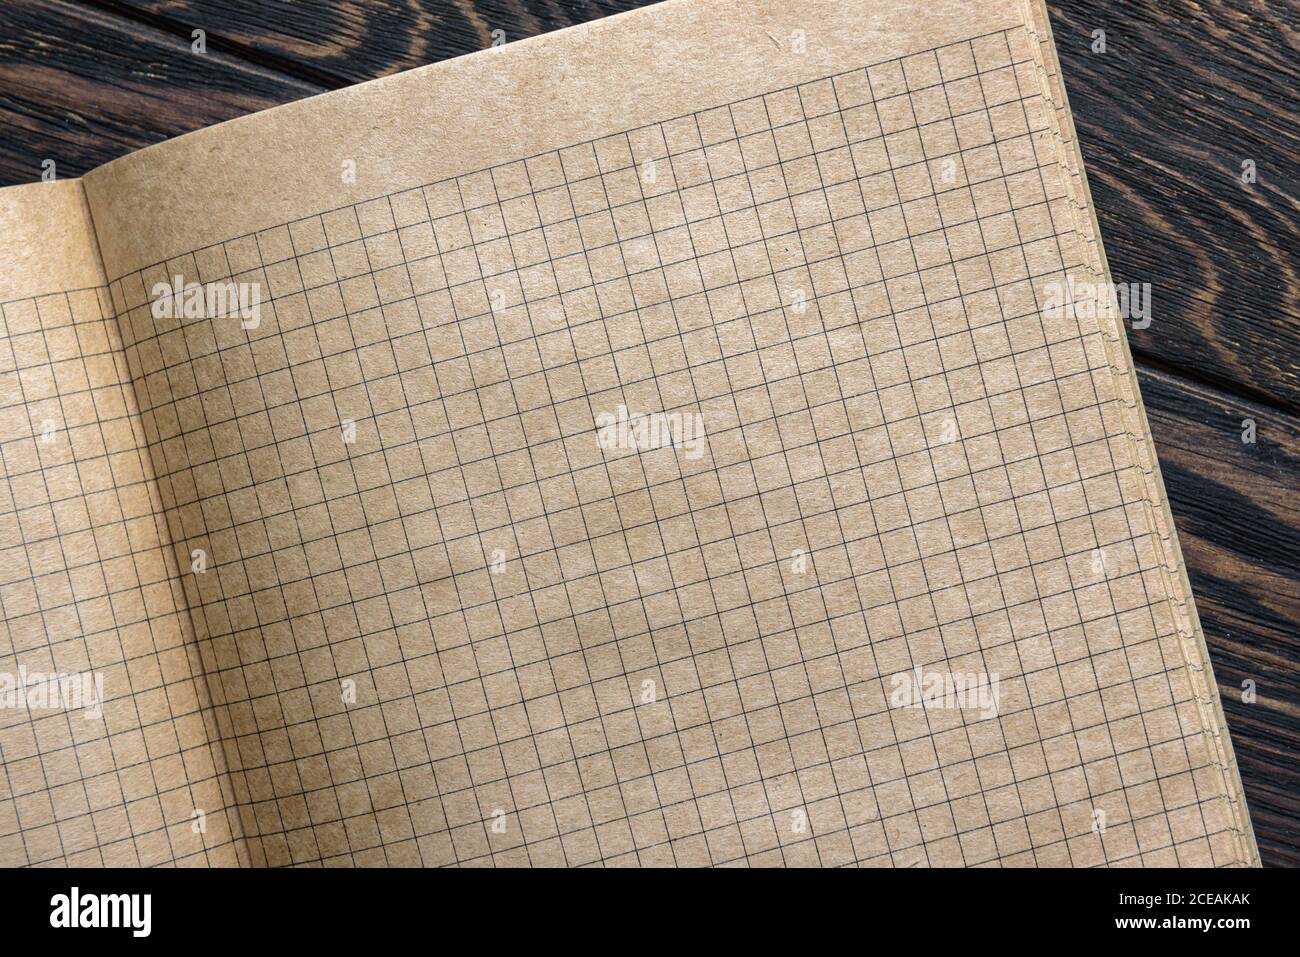 Grid paper of notebook background, open sketchbook with blank pages. Top view of vintage graph sheet on wooden desk, texture squared paper of school n Stock Photo